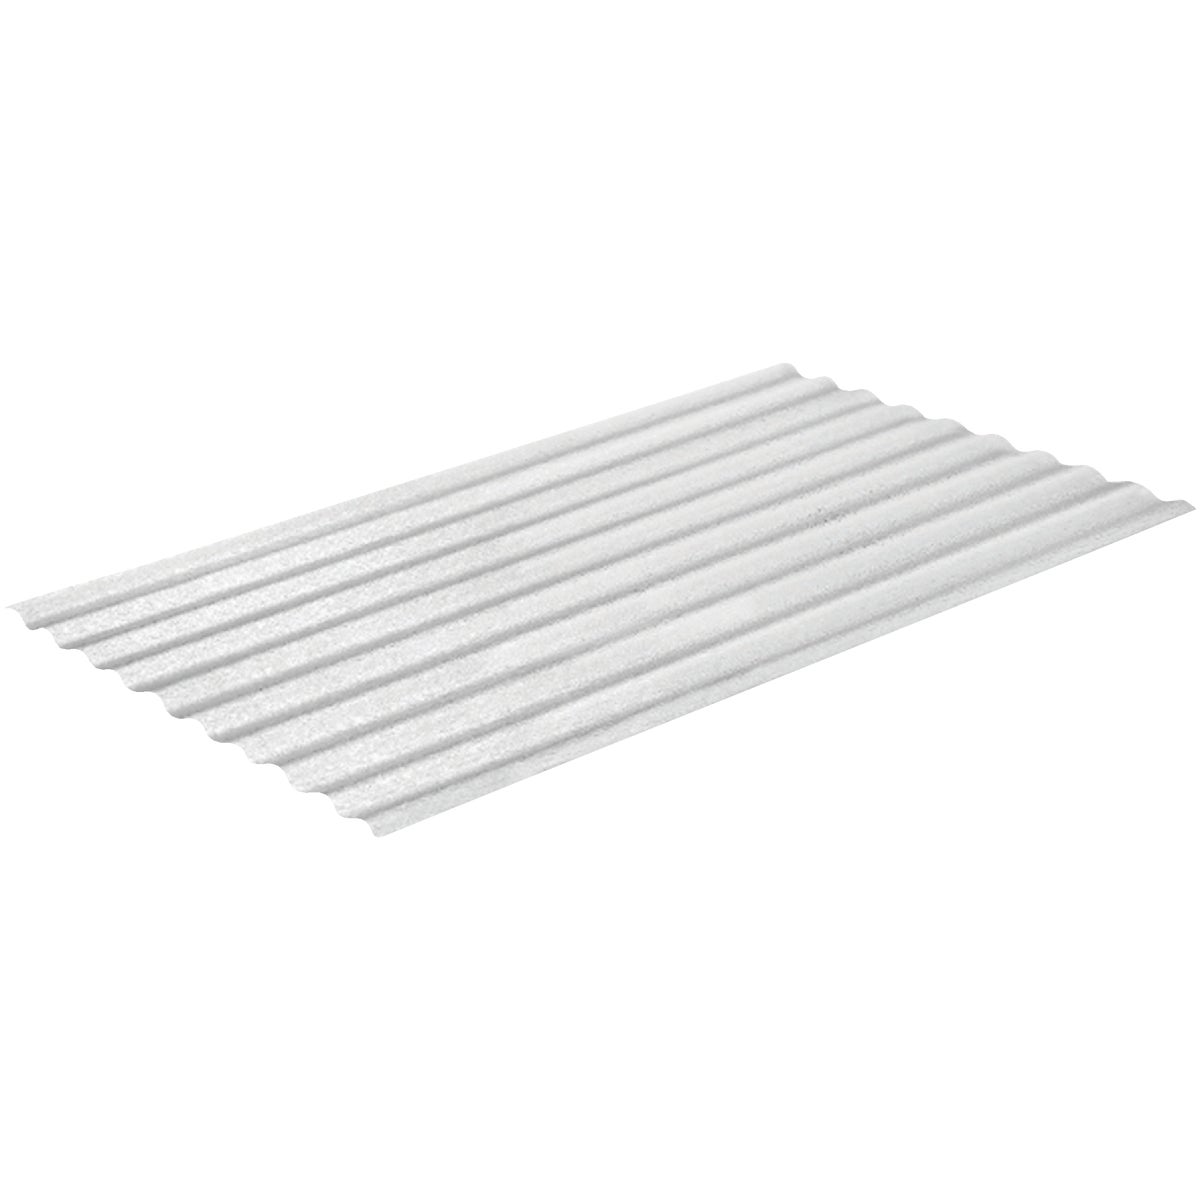 Item 100786, Translucent corrugated panels ideal for deck and patio covers, year round 